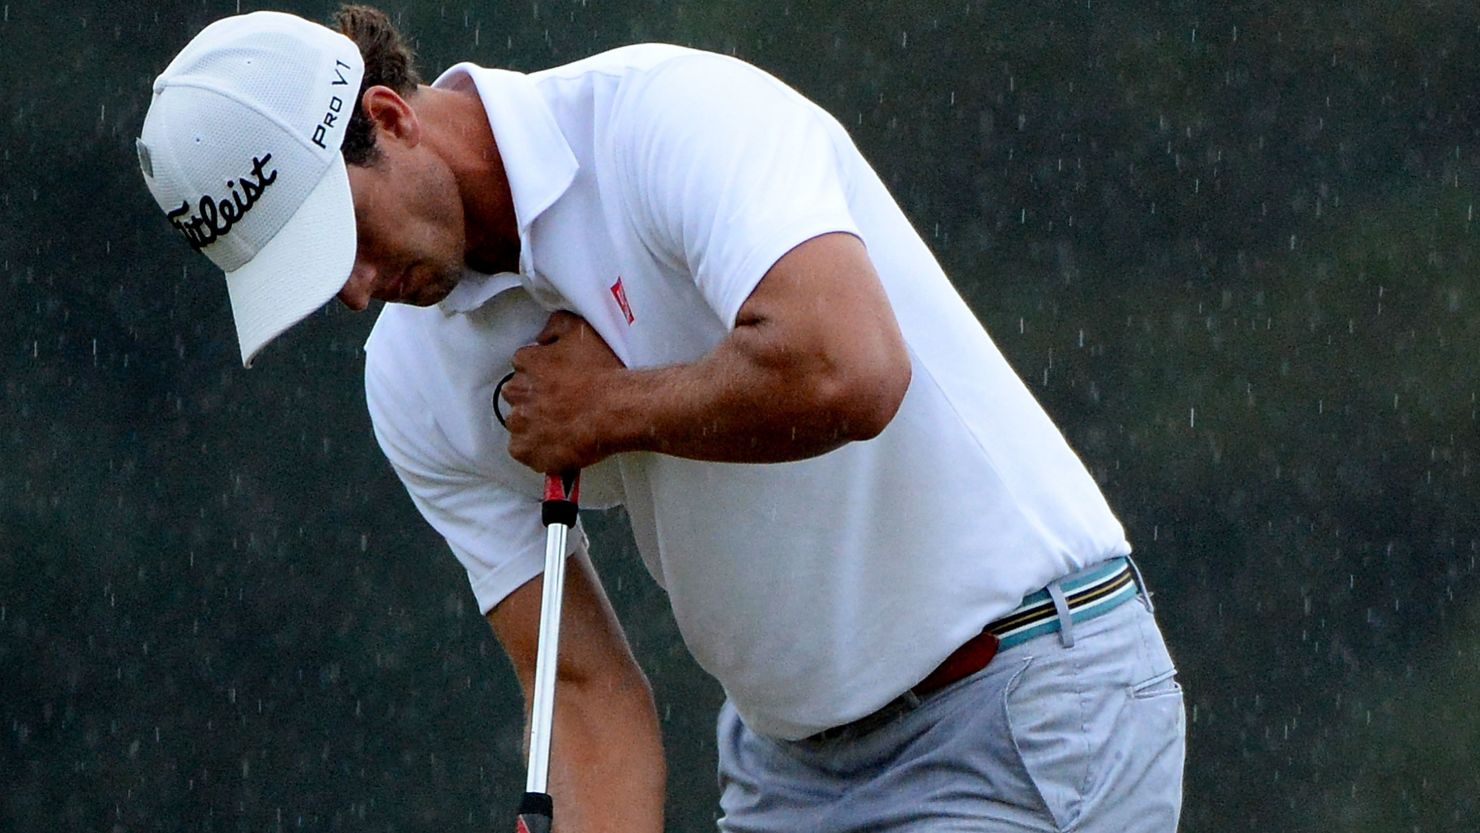  Adam Scott won the Masters in April using an anchored putter that he held close to his chest